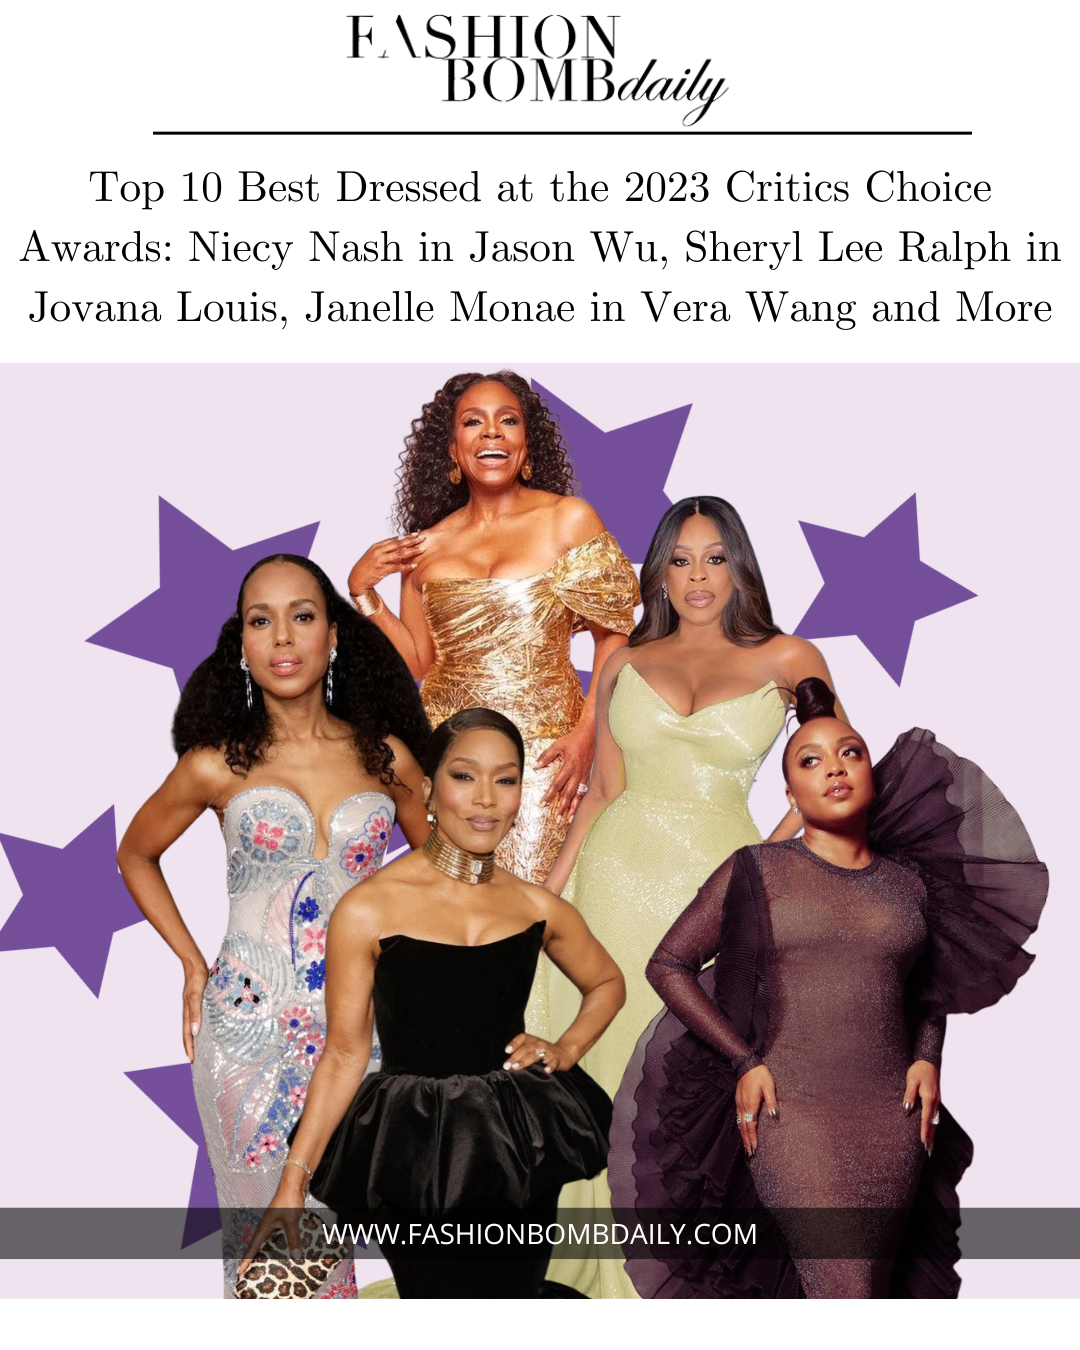 Top 10 Best Dressed at the 2023 Critics Choice Awards Niecy Nash in Jason Wu Sheryl Lee Ralph in Jovana Louis Janelle Monae in Vera Wang and More